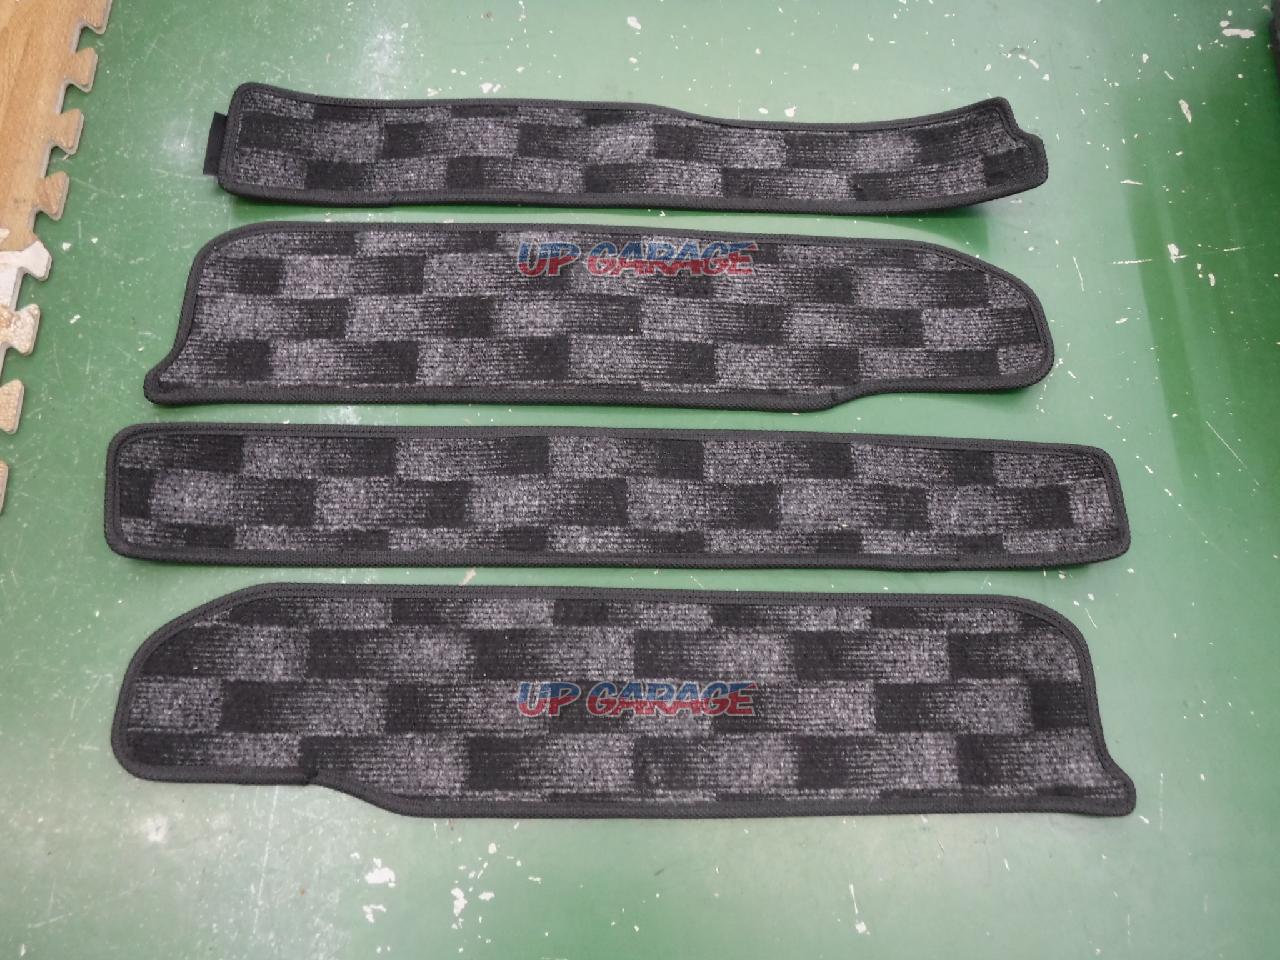 Original Toyota Step Mat 70 Series Voxy The Previous Fiscal Year Interior Accessories Croooober